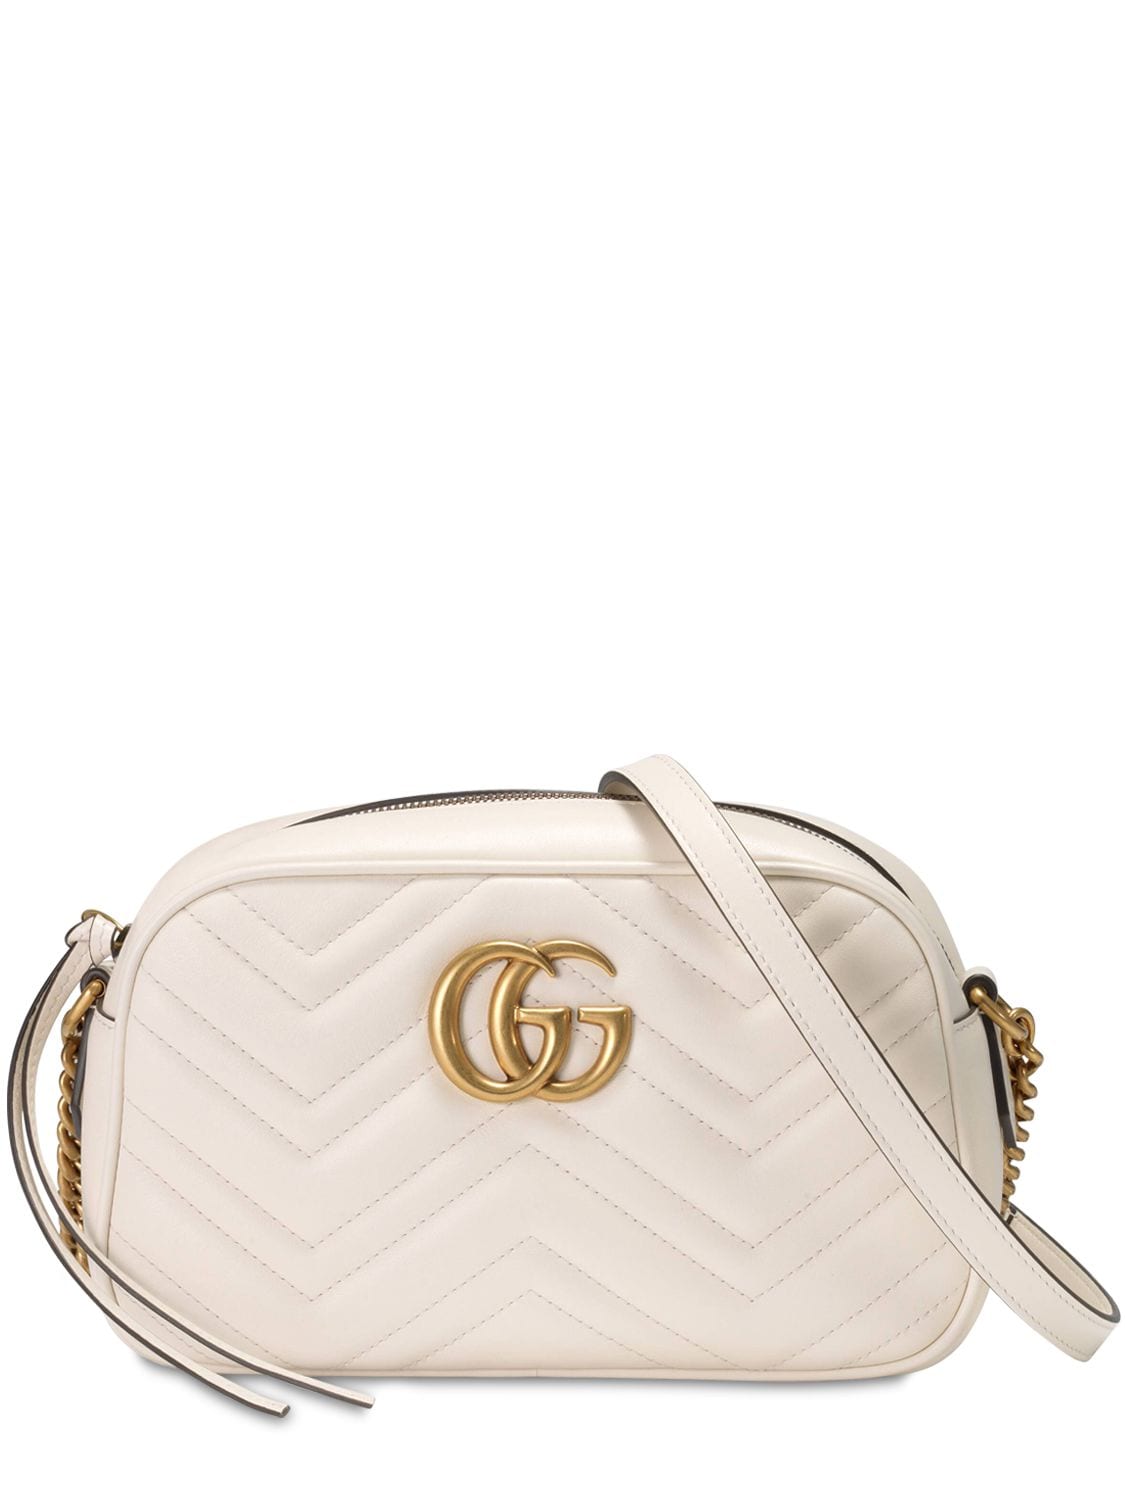 Gucci Gg Marmont Leather Camera Bag In Mystic White